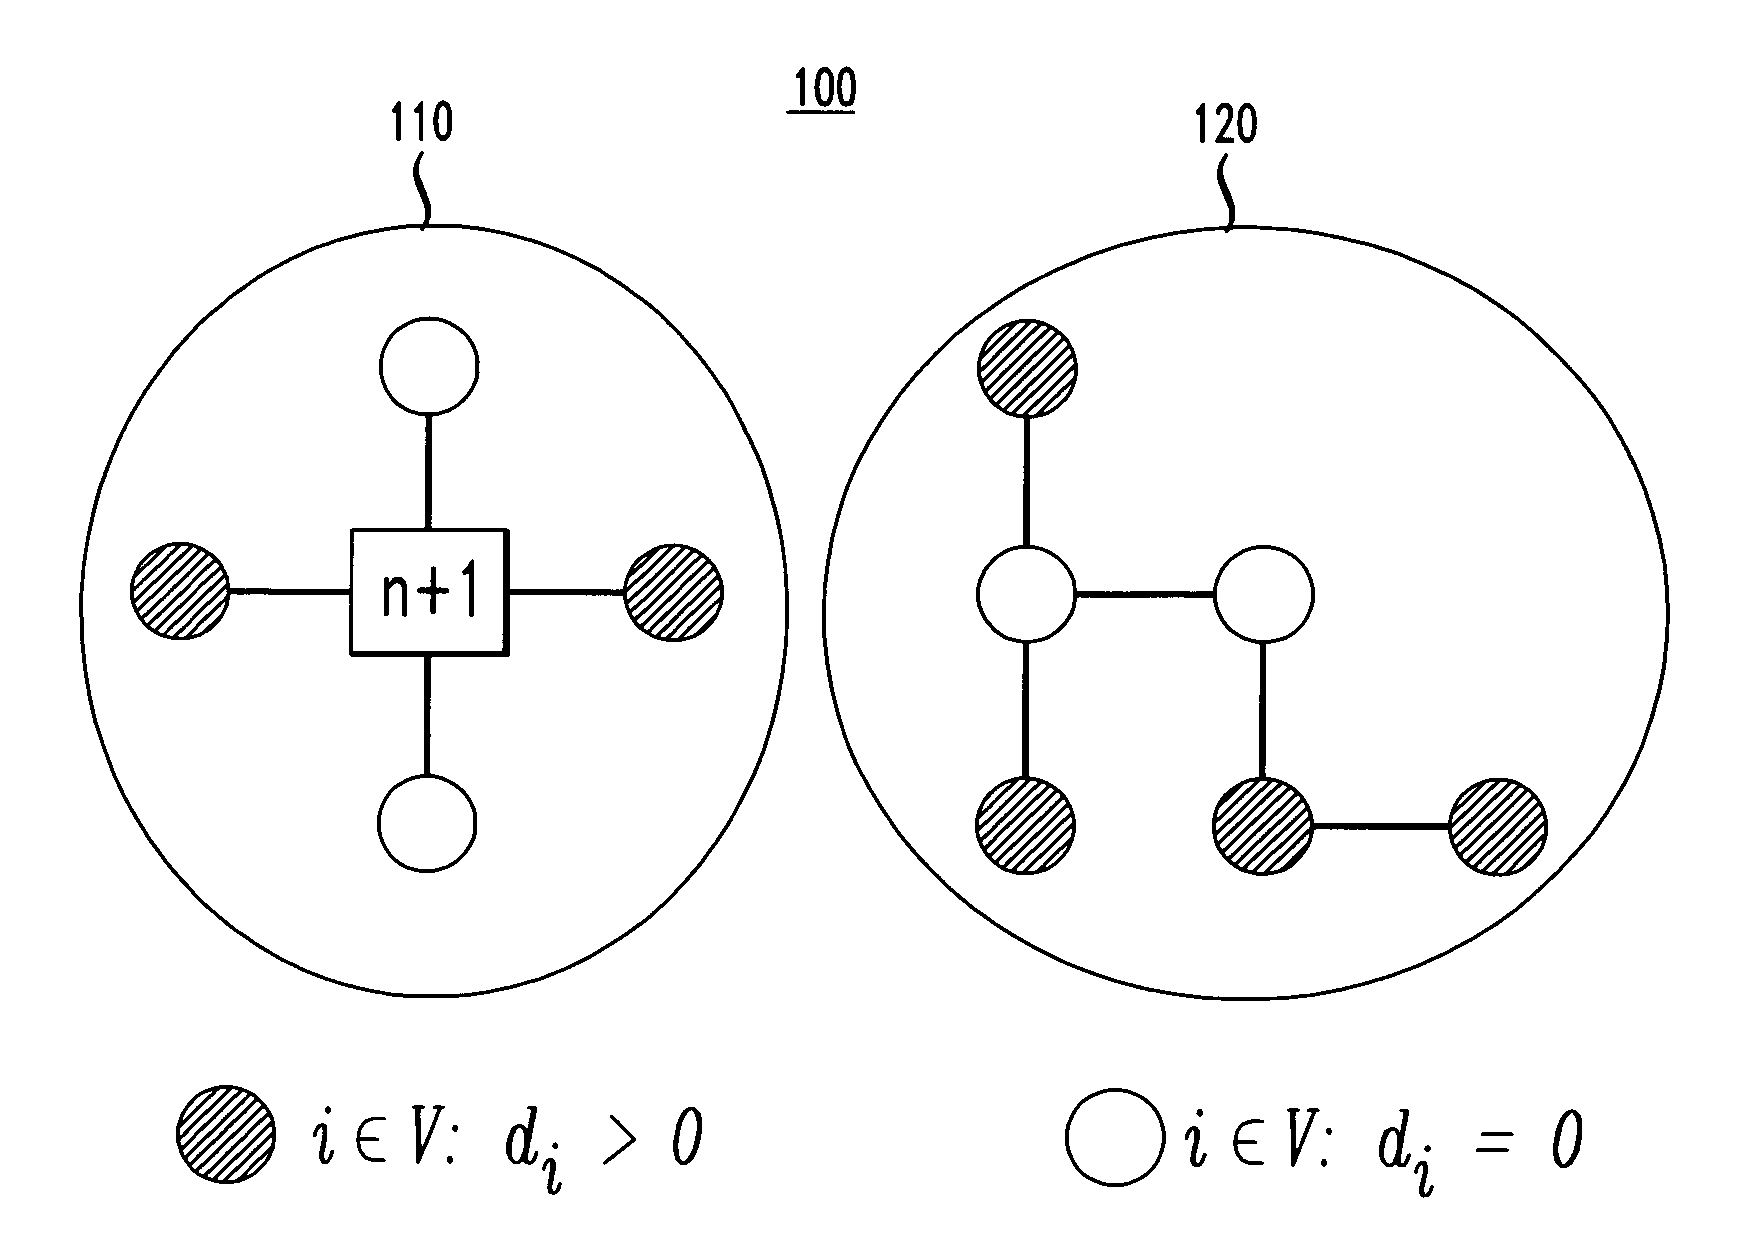 Method for network design to maximize difference of revenue and network cost